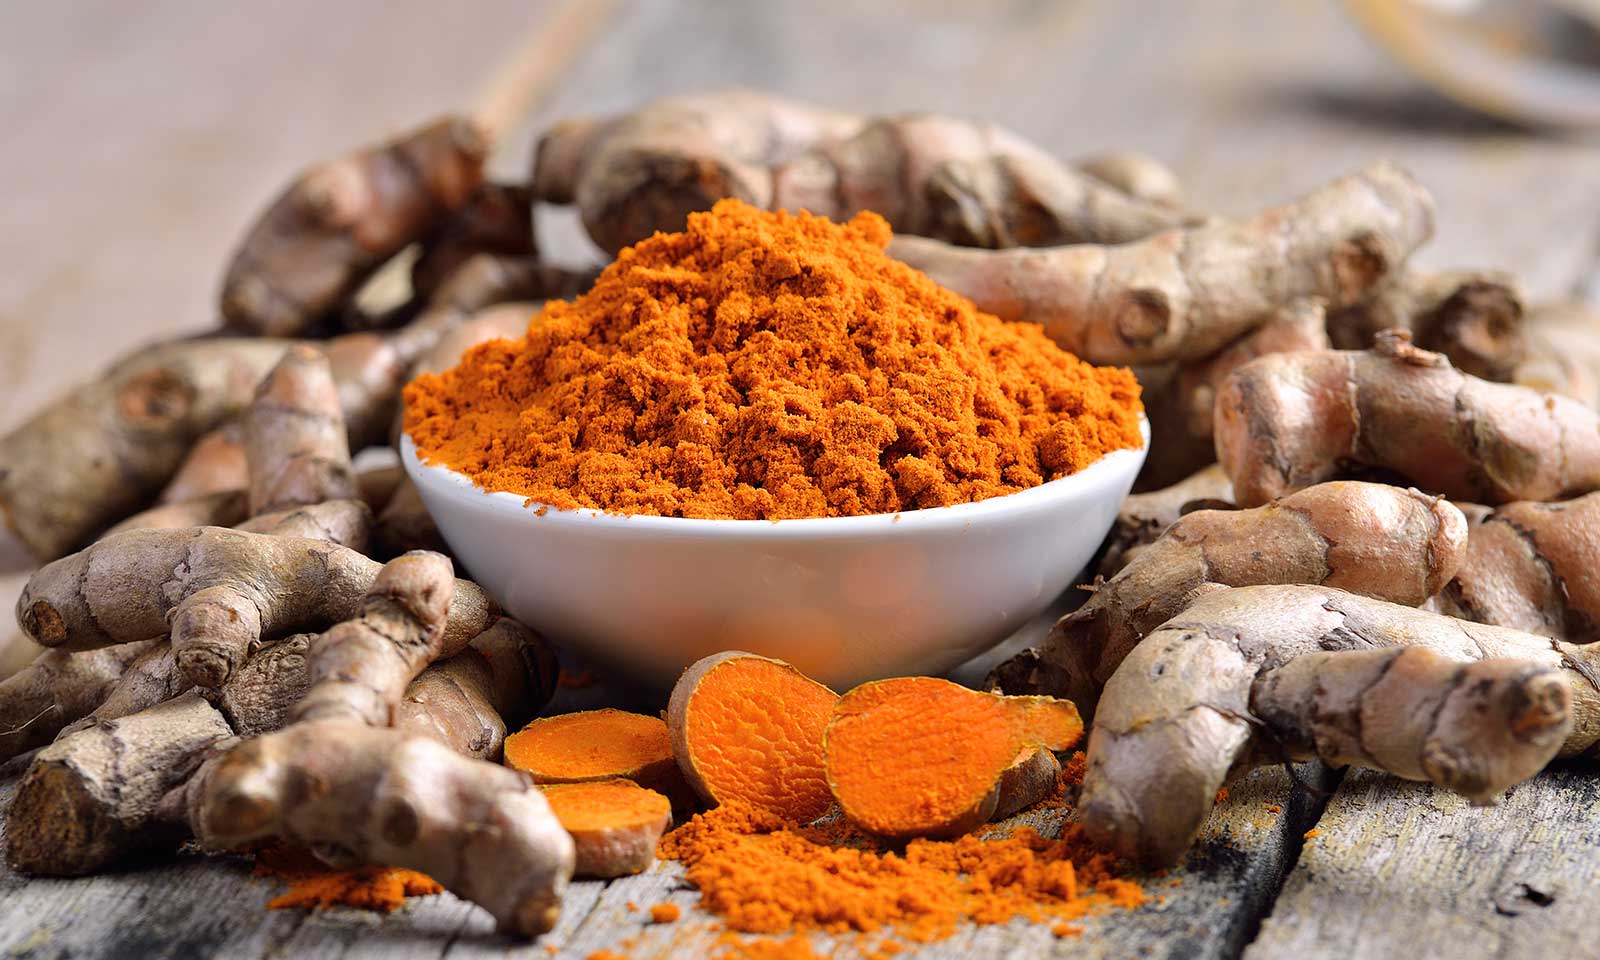 Reasons Why You Need More Turmeric In Your Diet